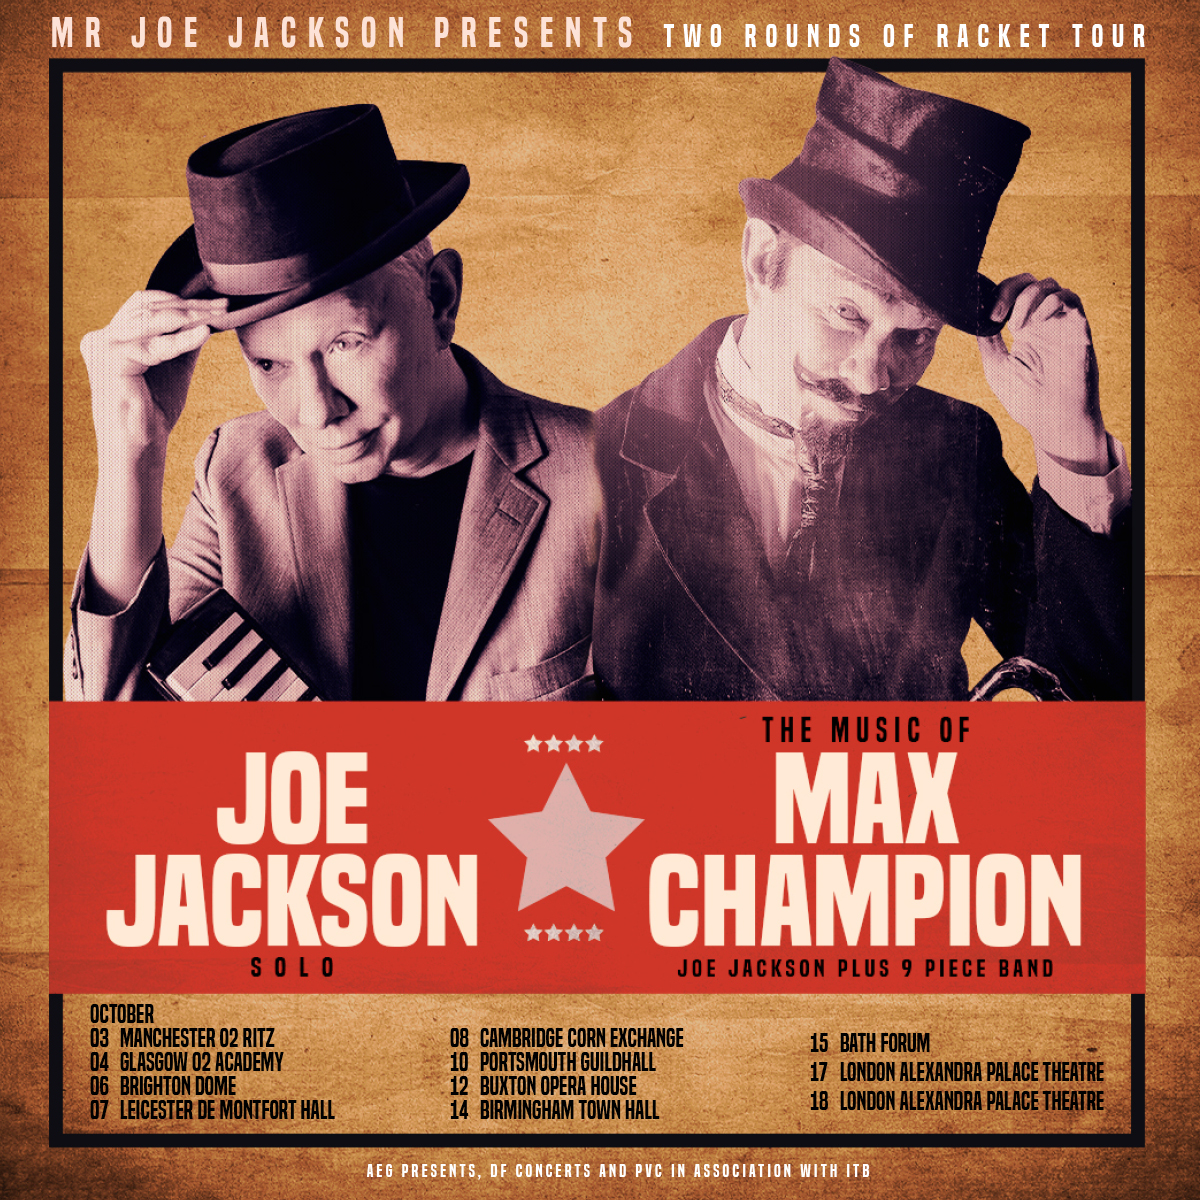 Hitting the road on 'The Two Rounds Of Racket Tour', @joejacksonmusic heads here Thu 3 Oct, for a solo set by Joe of his original songs and a set based on the album 'What A Racket!' Get 48-hour early access Priority Tickets from 10am Wed 13 Mar 👉 amg-venues.com/8rVB50QOtMC